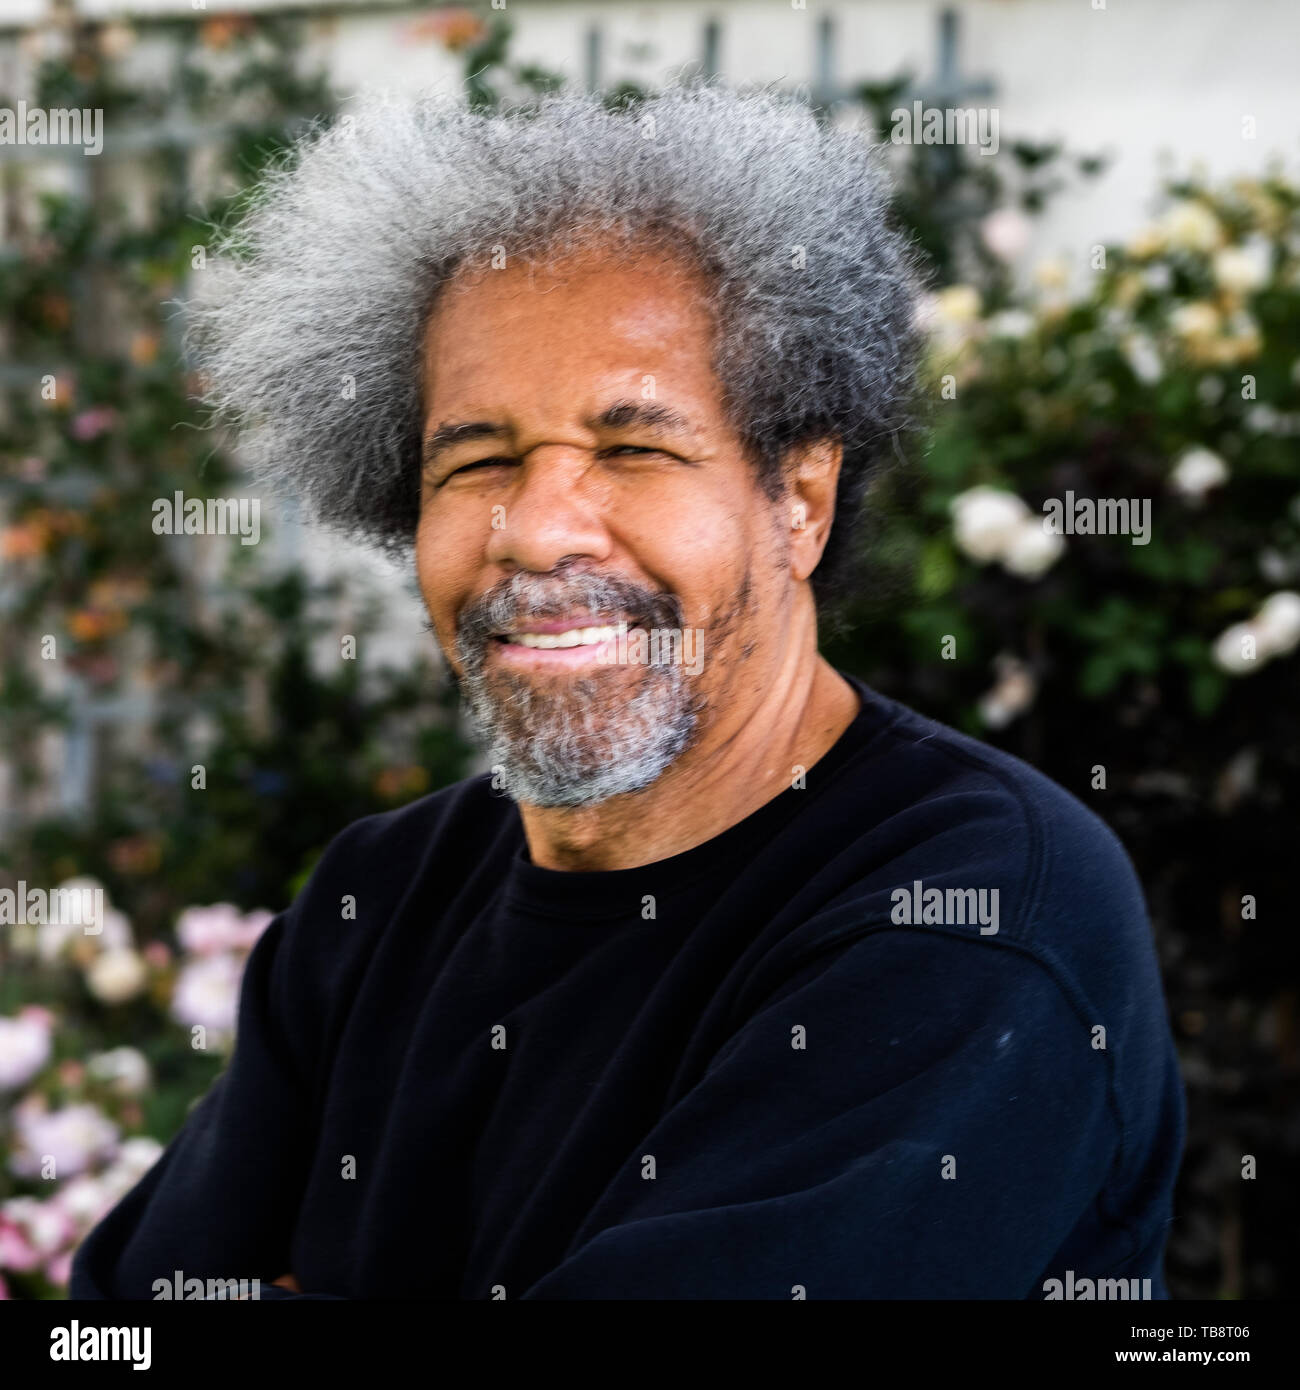 The Hay Festival, Hay on Wye, Wales UK , Friday 31st May 2019.  Albert Woodfox , who served more than four decades in solitary confinement, in a 6 x 9-foot cell, twenty-three hours a day, in the notorious Angola prison in Louisiana USA for a crime he did not commit. Credit: keith morris/Alamy Live News Stock Photo